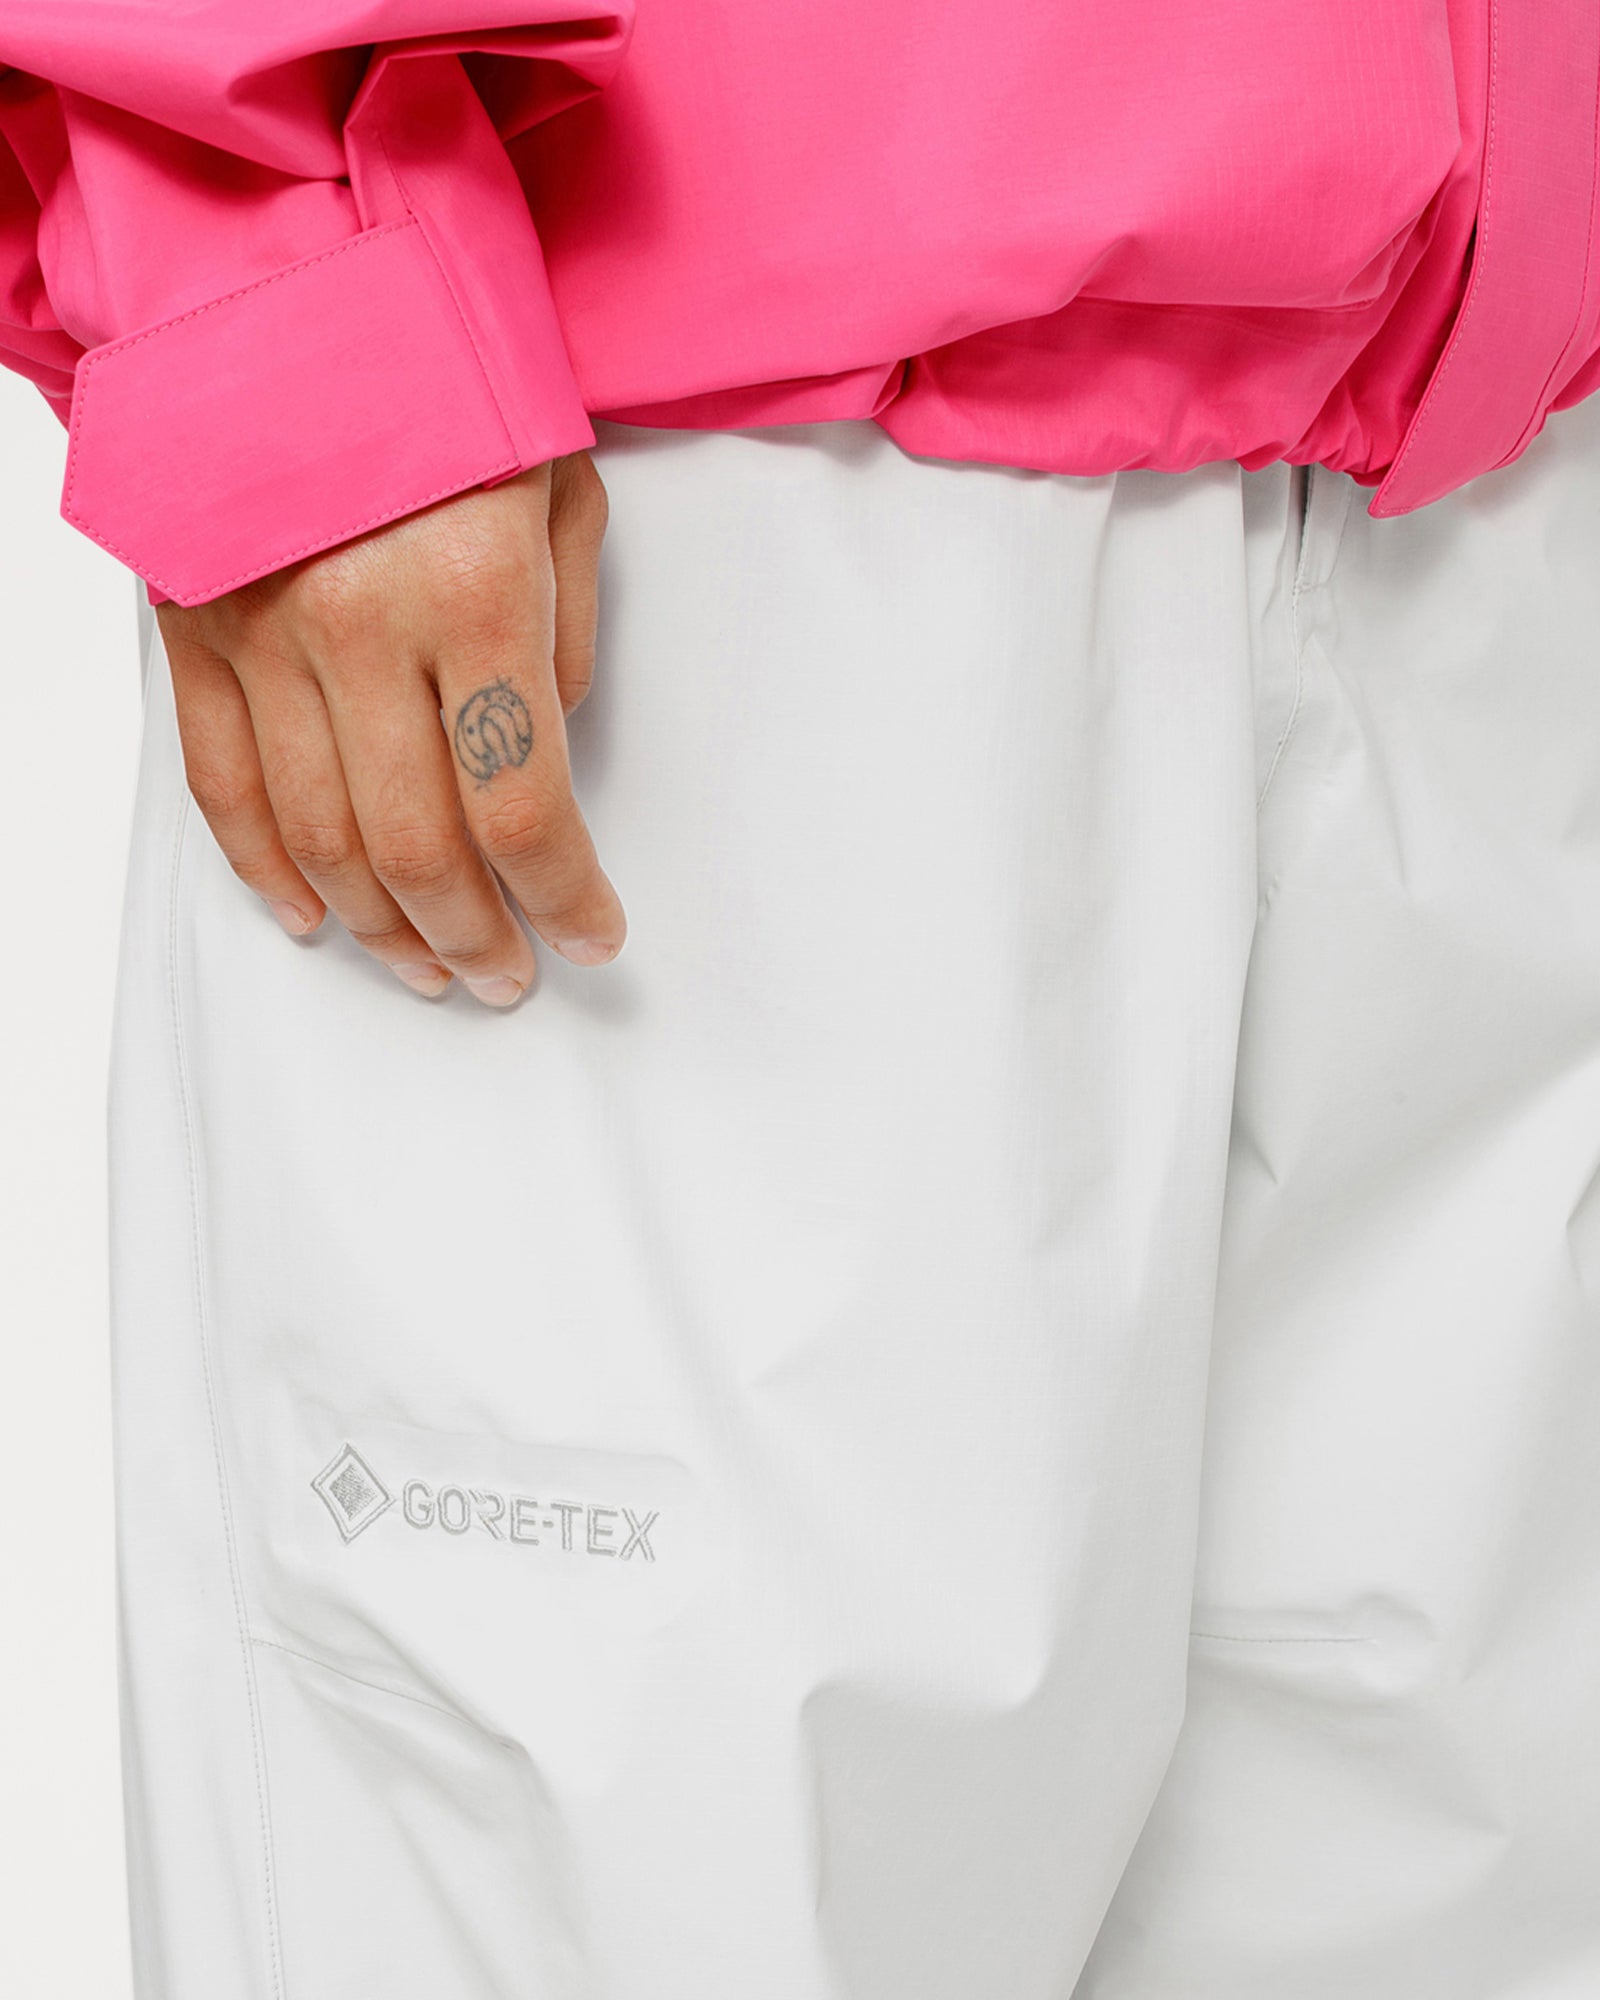 GORE-TEX OVER TROUSER  PANTS